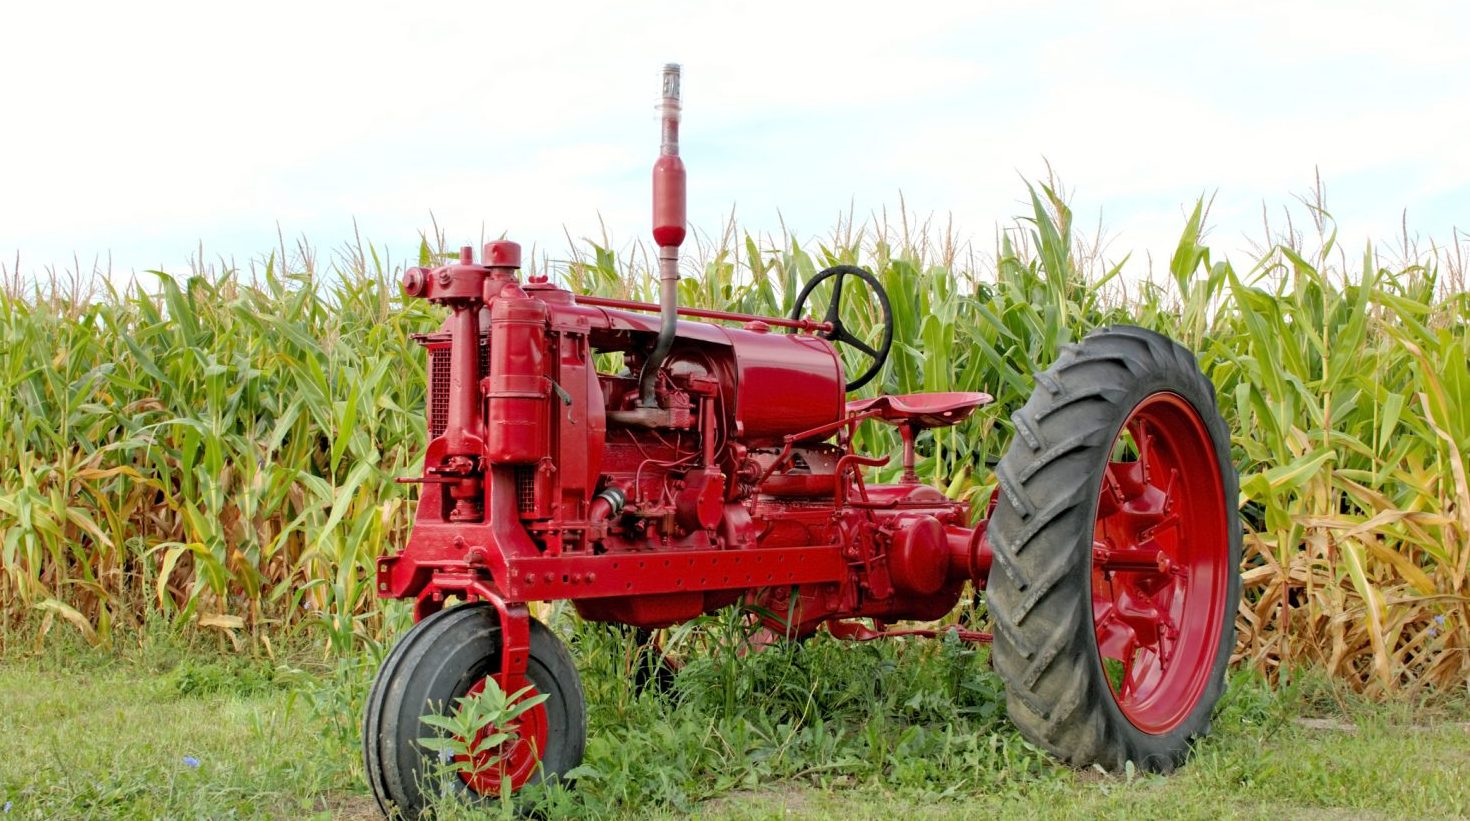 Antique red tractor in front of a corn field at the Oak Ridge Festival